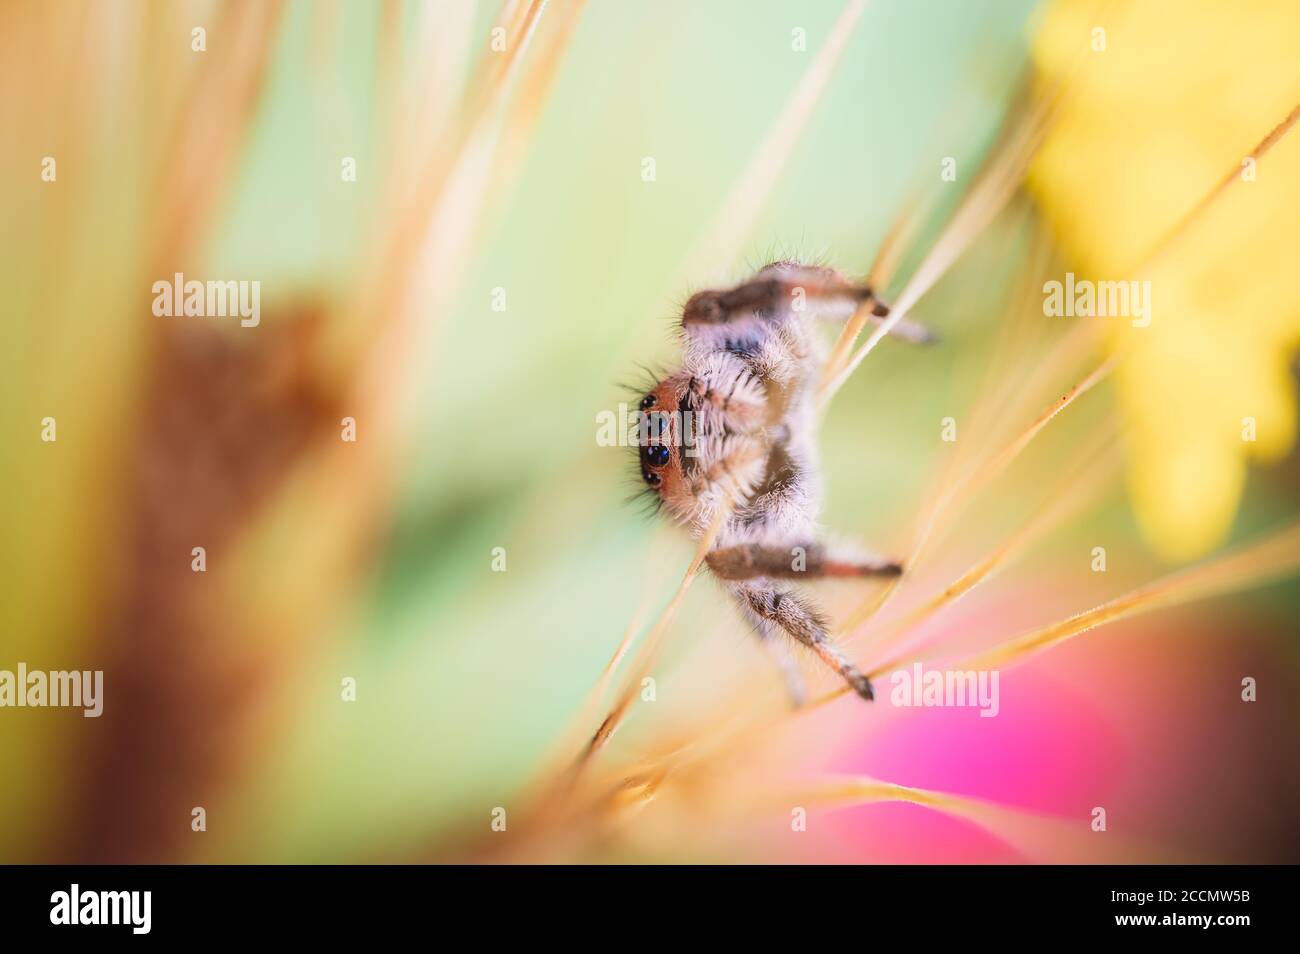 Female jumping spider (Phidippus regius) crawling on barley. Autumn warm colors, macro, sharp details. Beautiful huge eyes are looking at the camera. Stock Photo